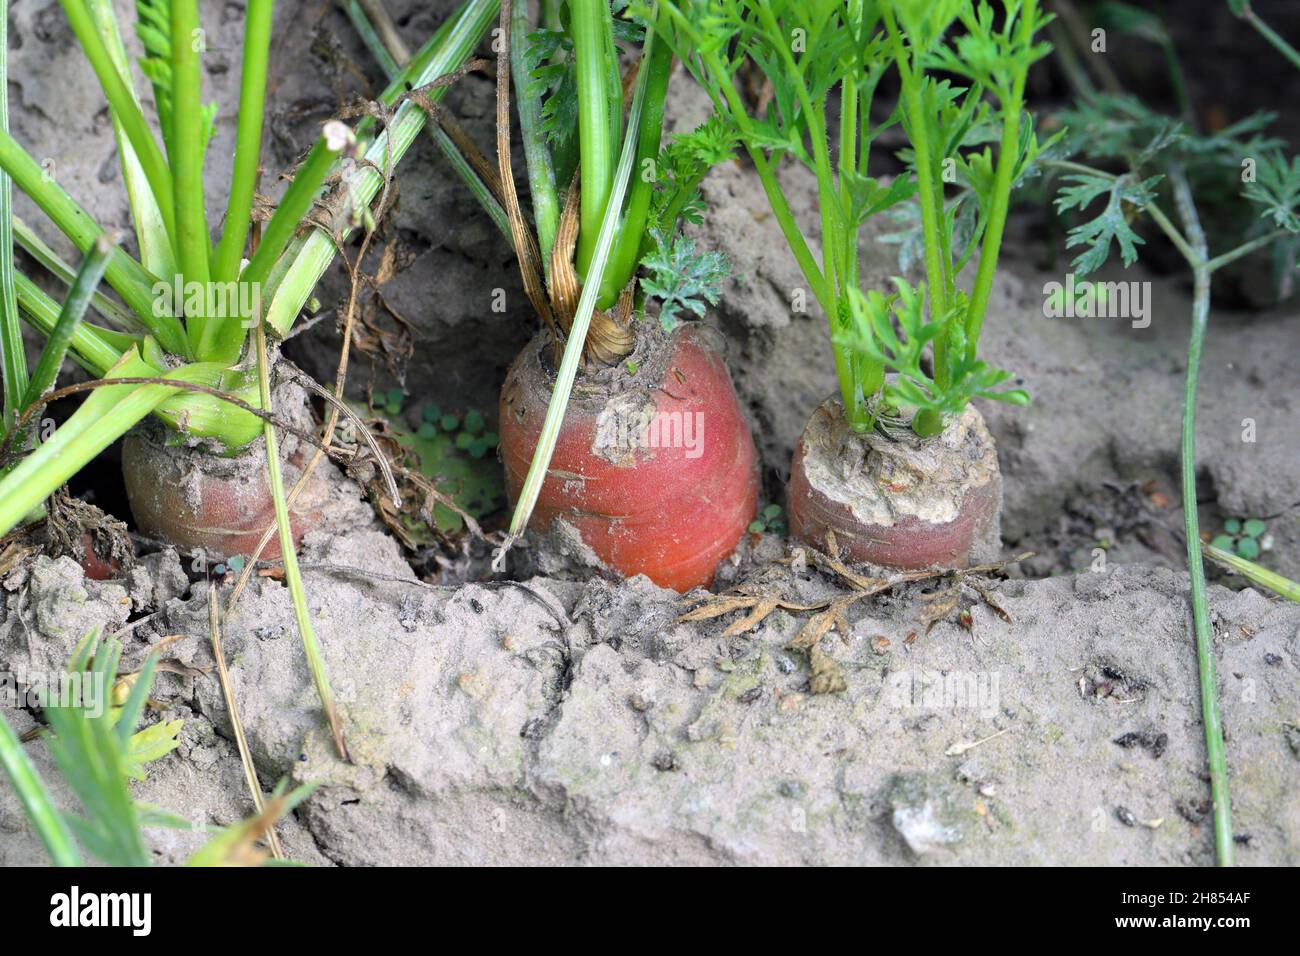 Carrot roots damaged by rodents in the plantation. Stock Photo